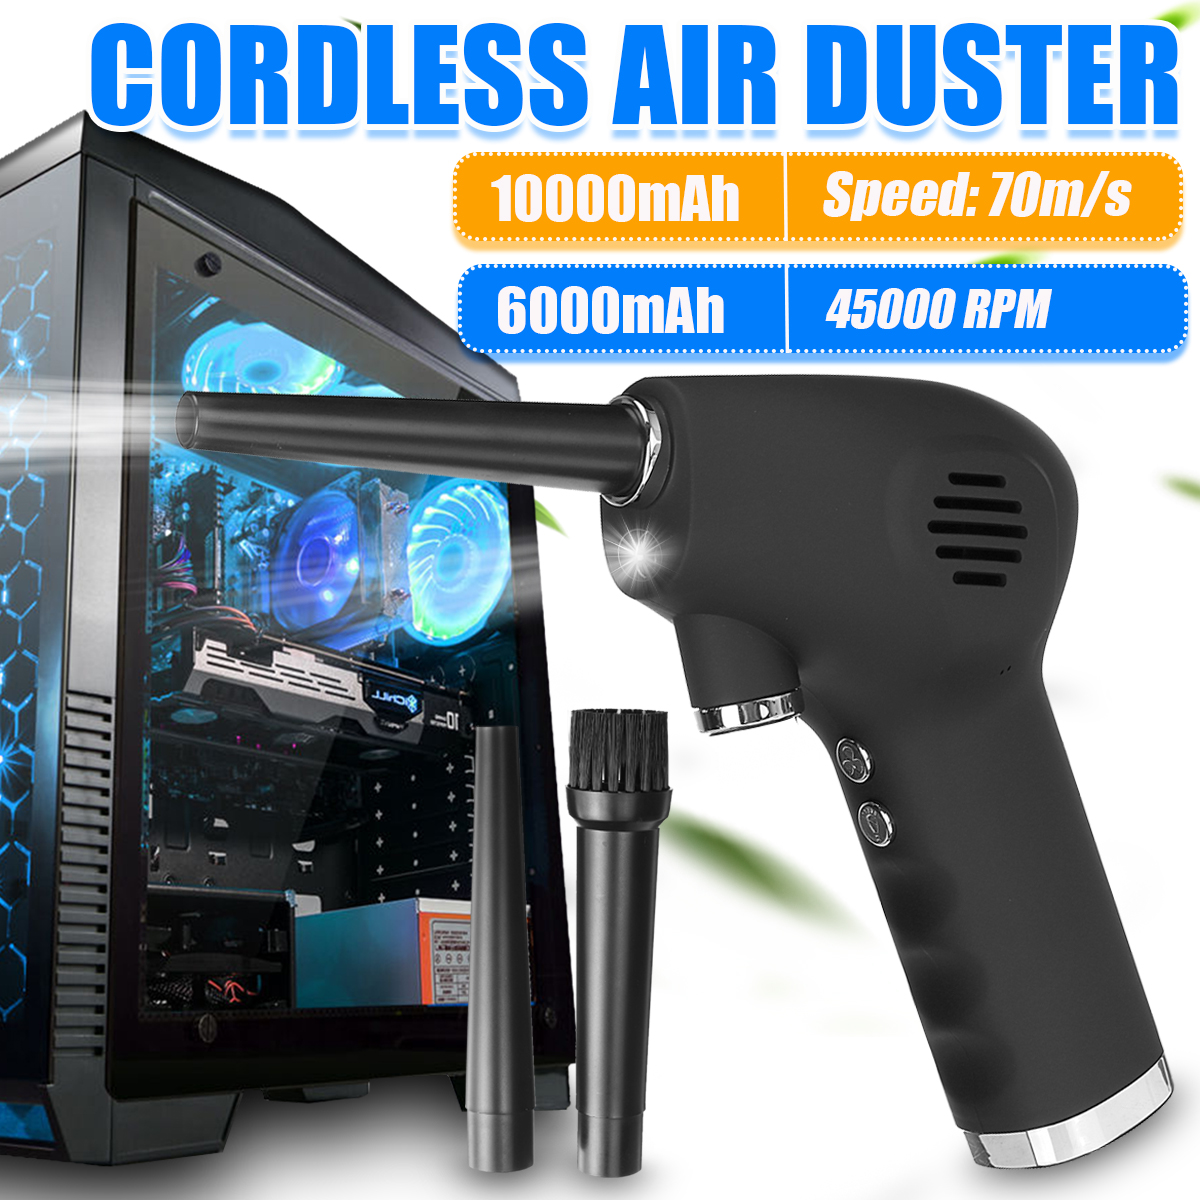 70ms-Cordless-Air-Duster-For-Computer-Cleaning-Replaces-Compressed-Spray-Gas-Cans-Rechargeable-Clean-1900743-1